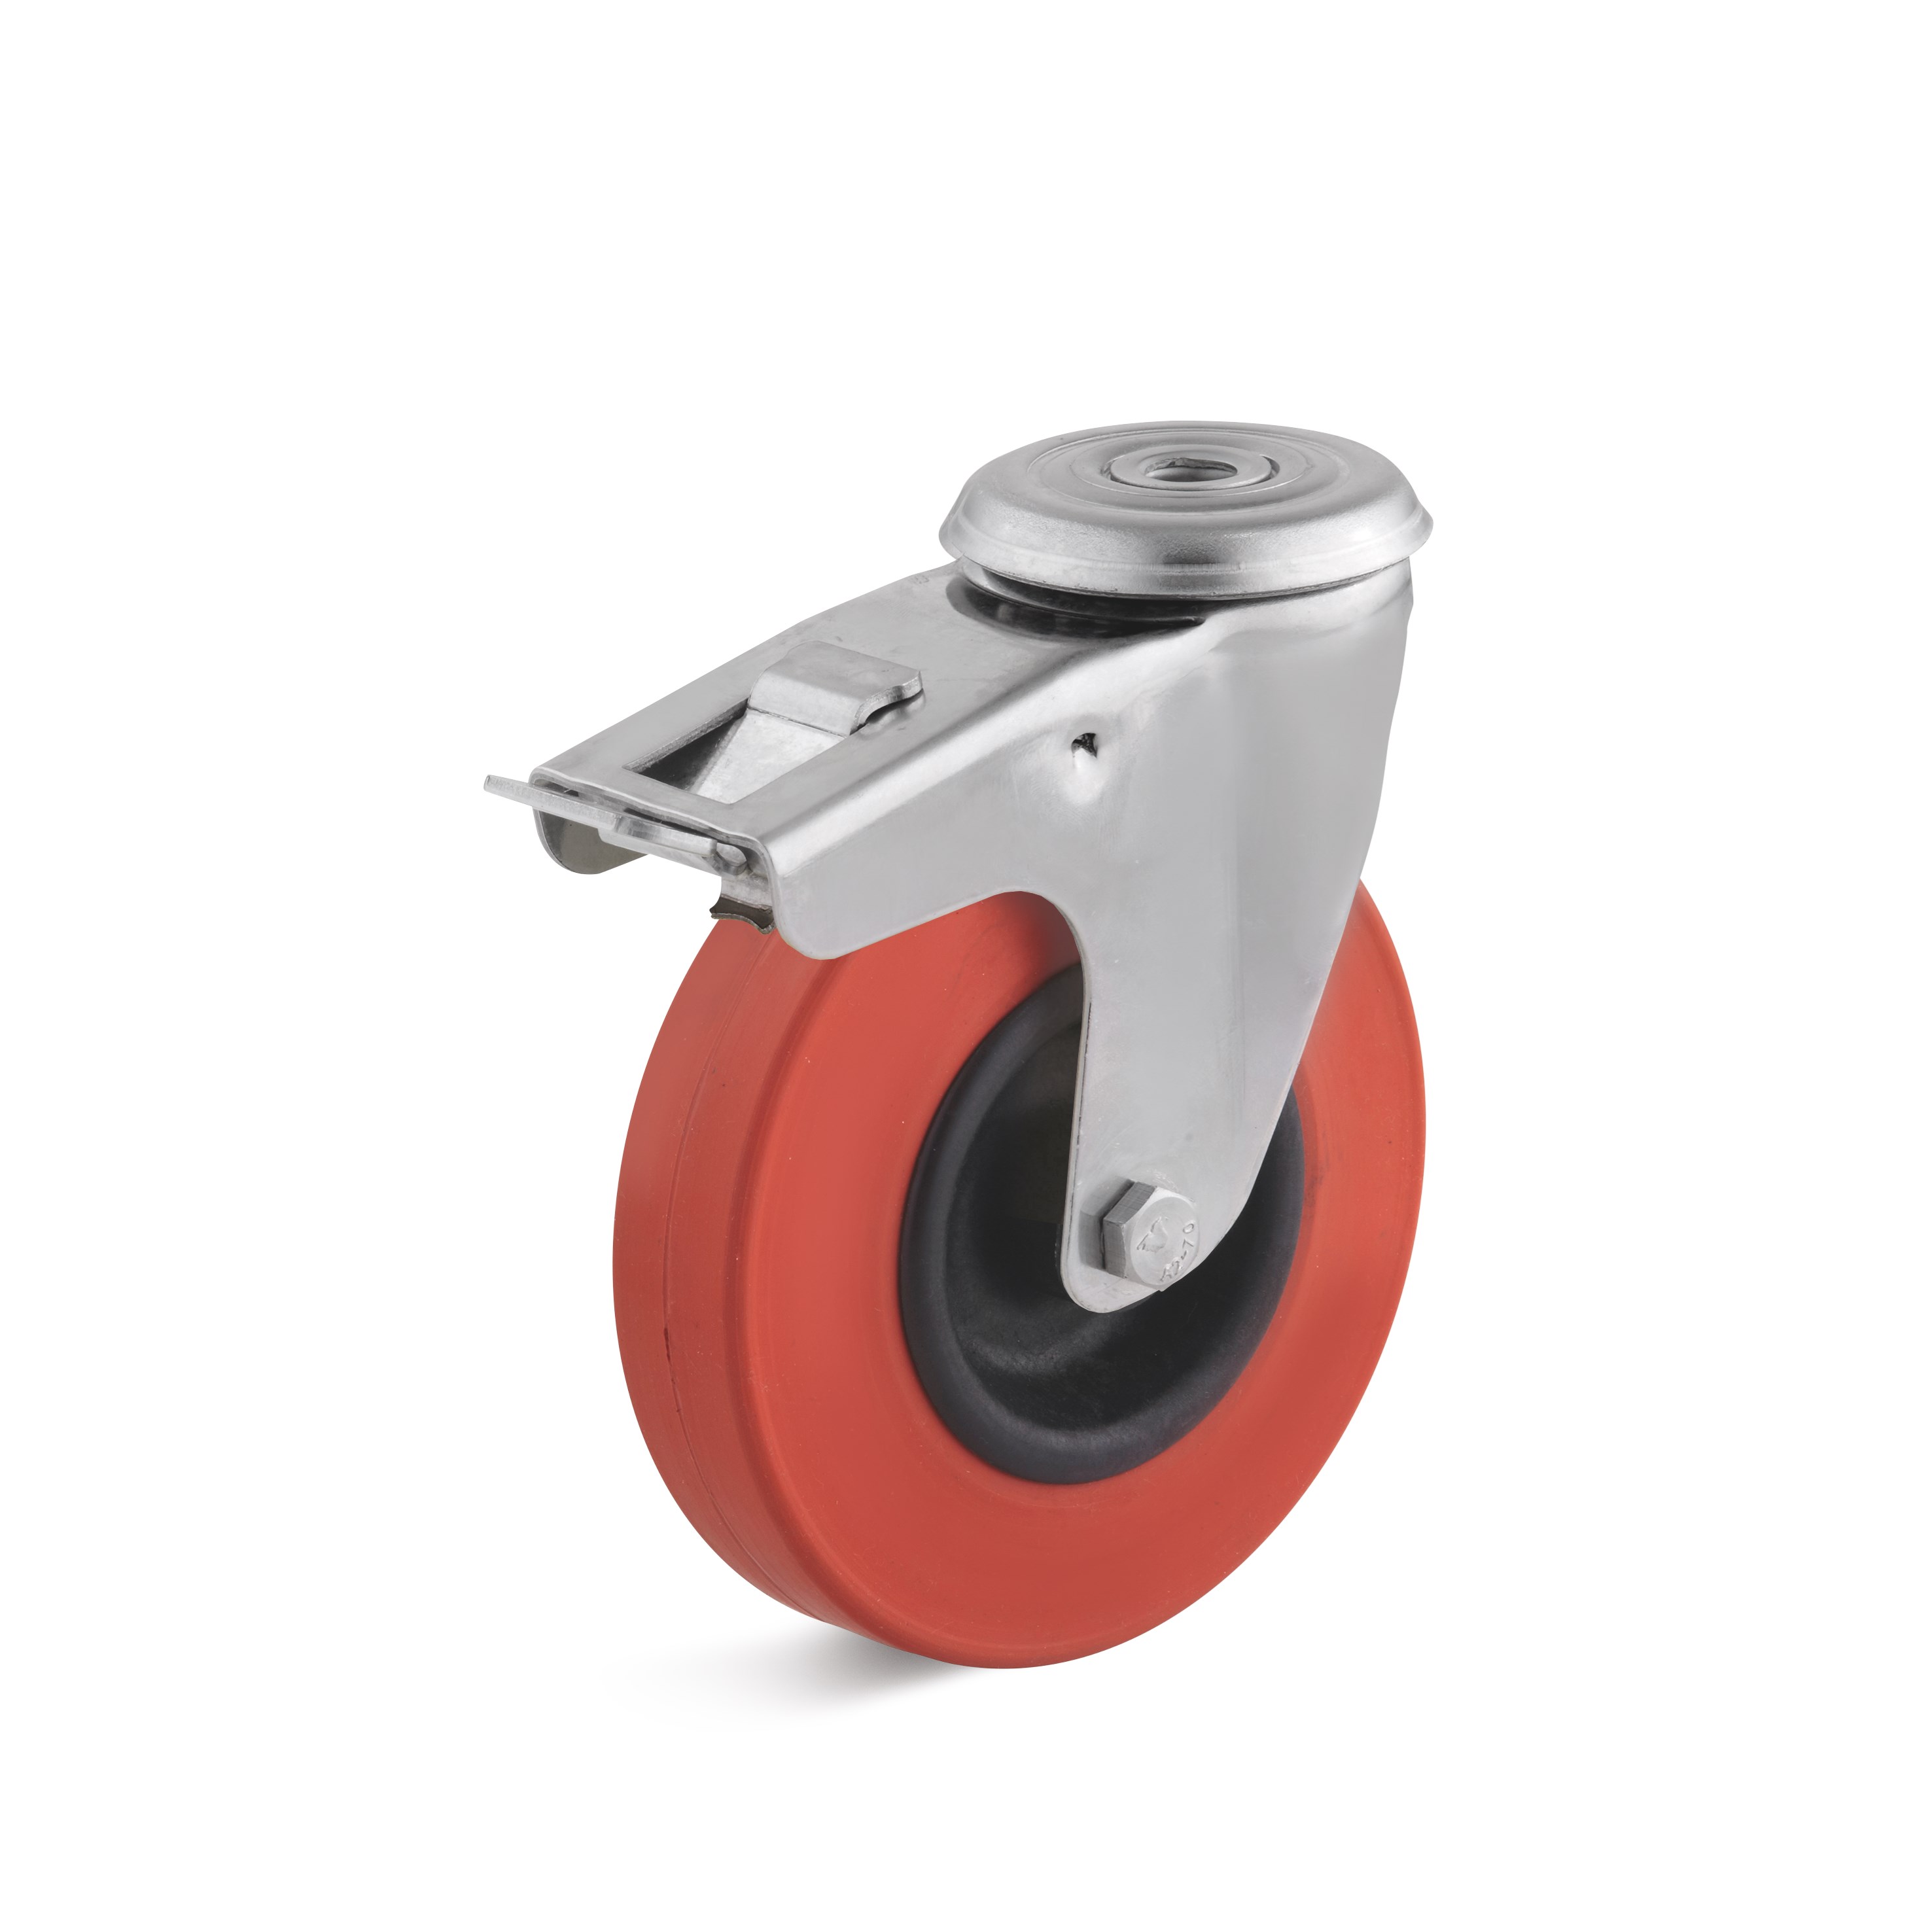 Stainless steel swivel castor with double stop and bolt hole, heat-resistant wheel L-IV-HGK-125-G-1-DSN-ROT